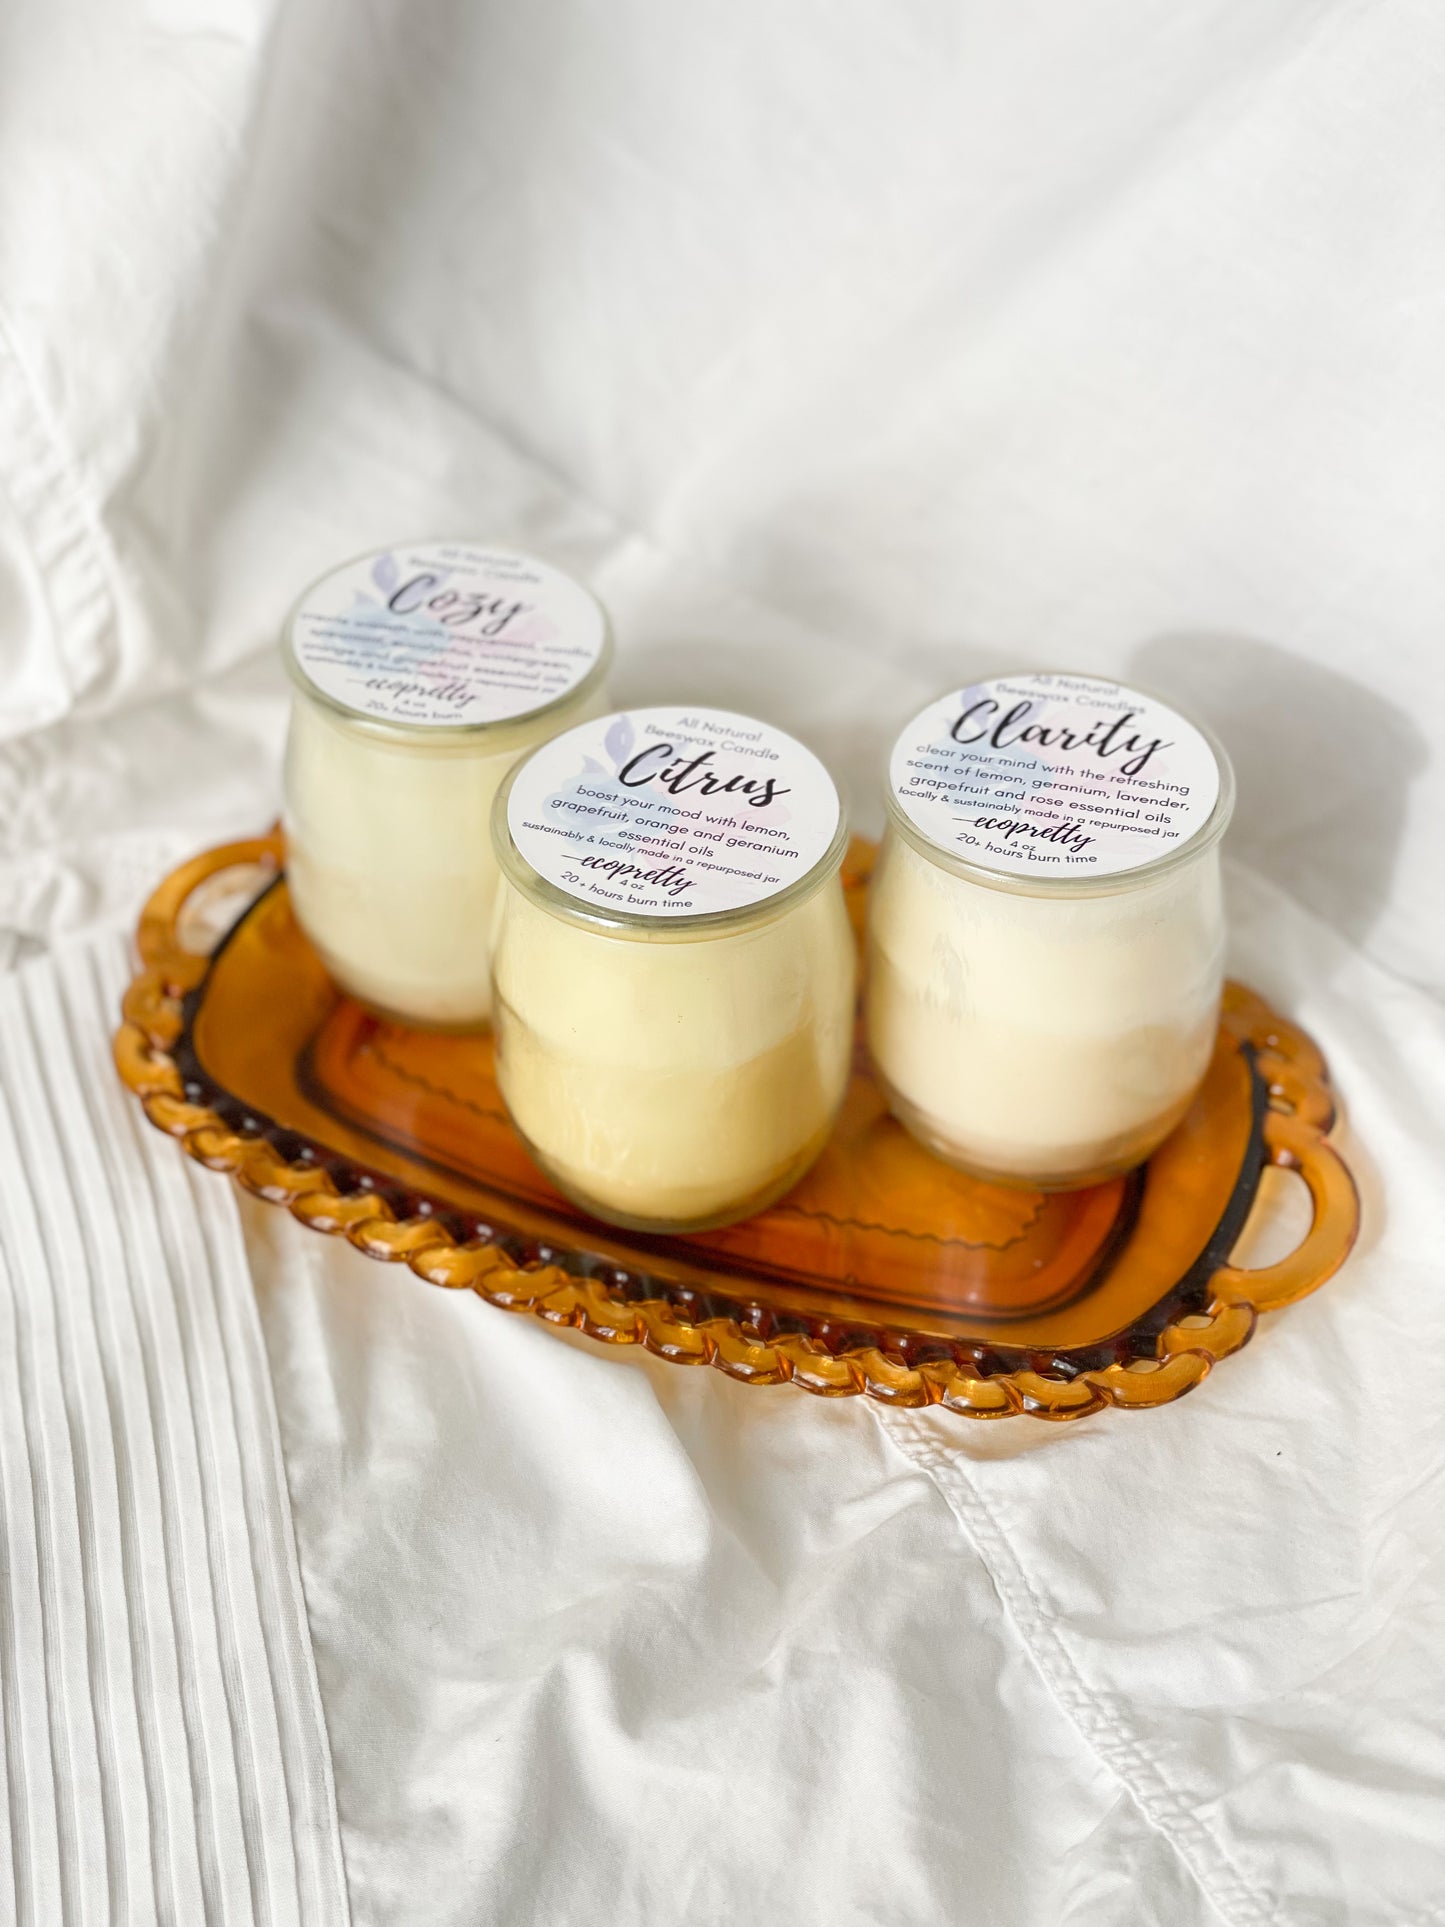 Cozy Scented Citrus Vanilla Mint Natural Scented 100% Beeswax Candle - 4oz